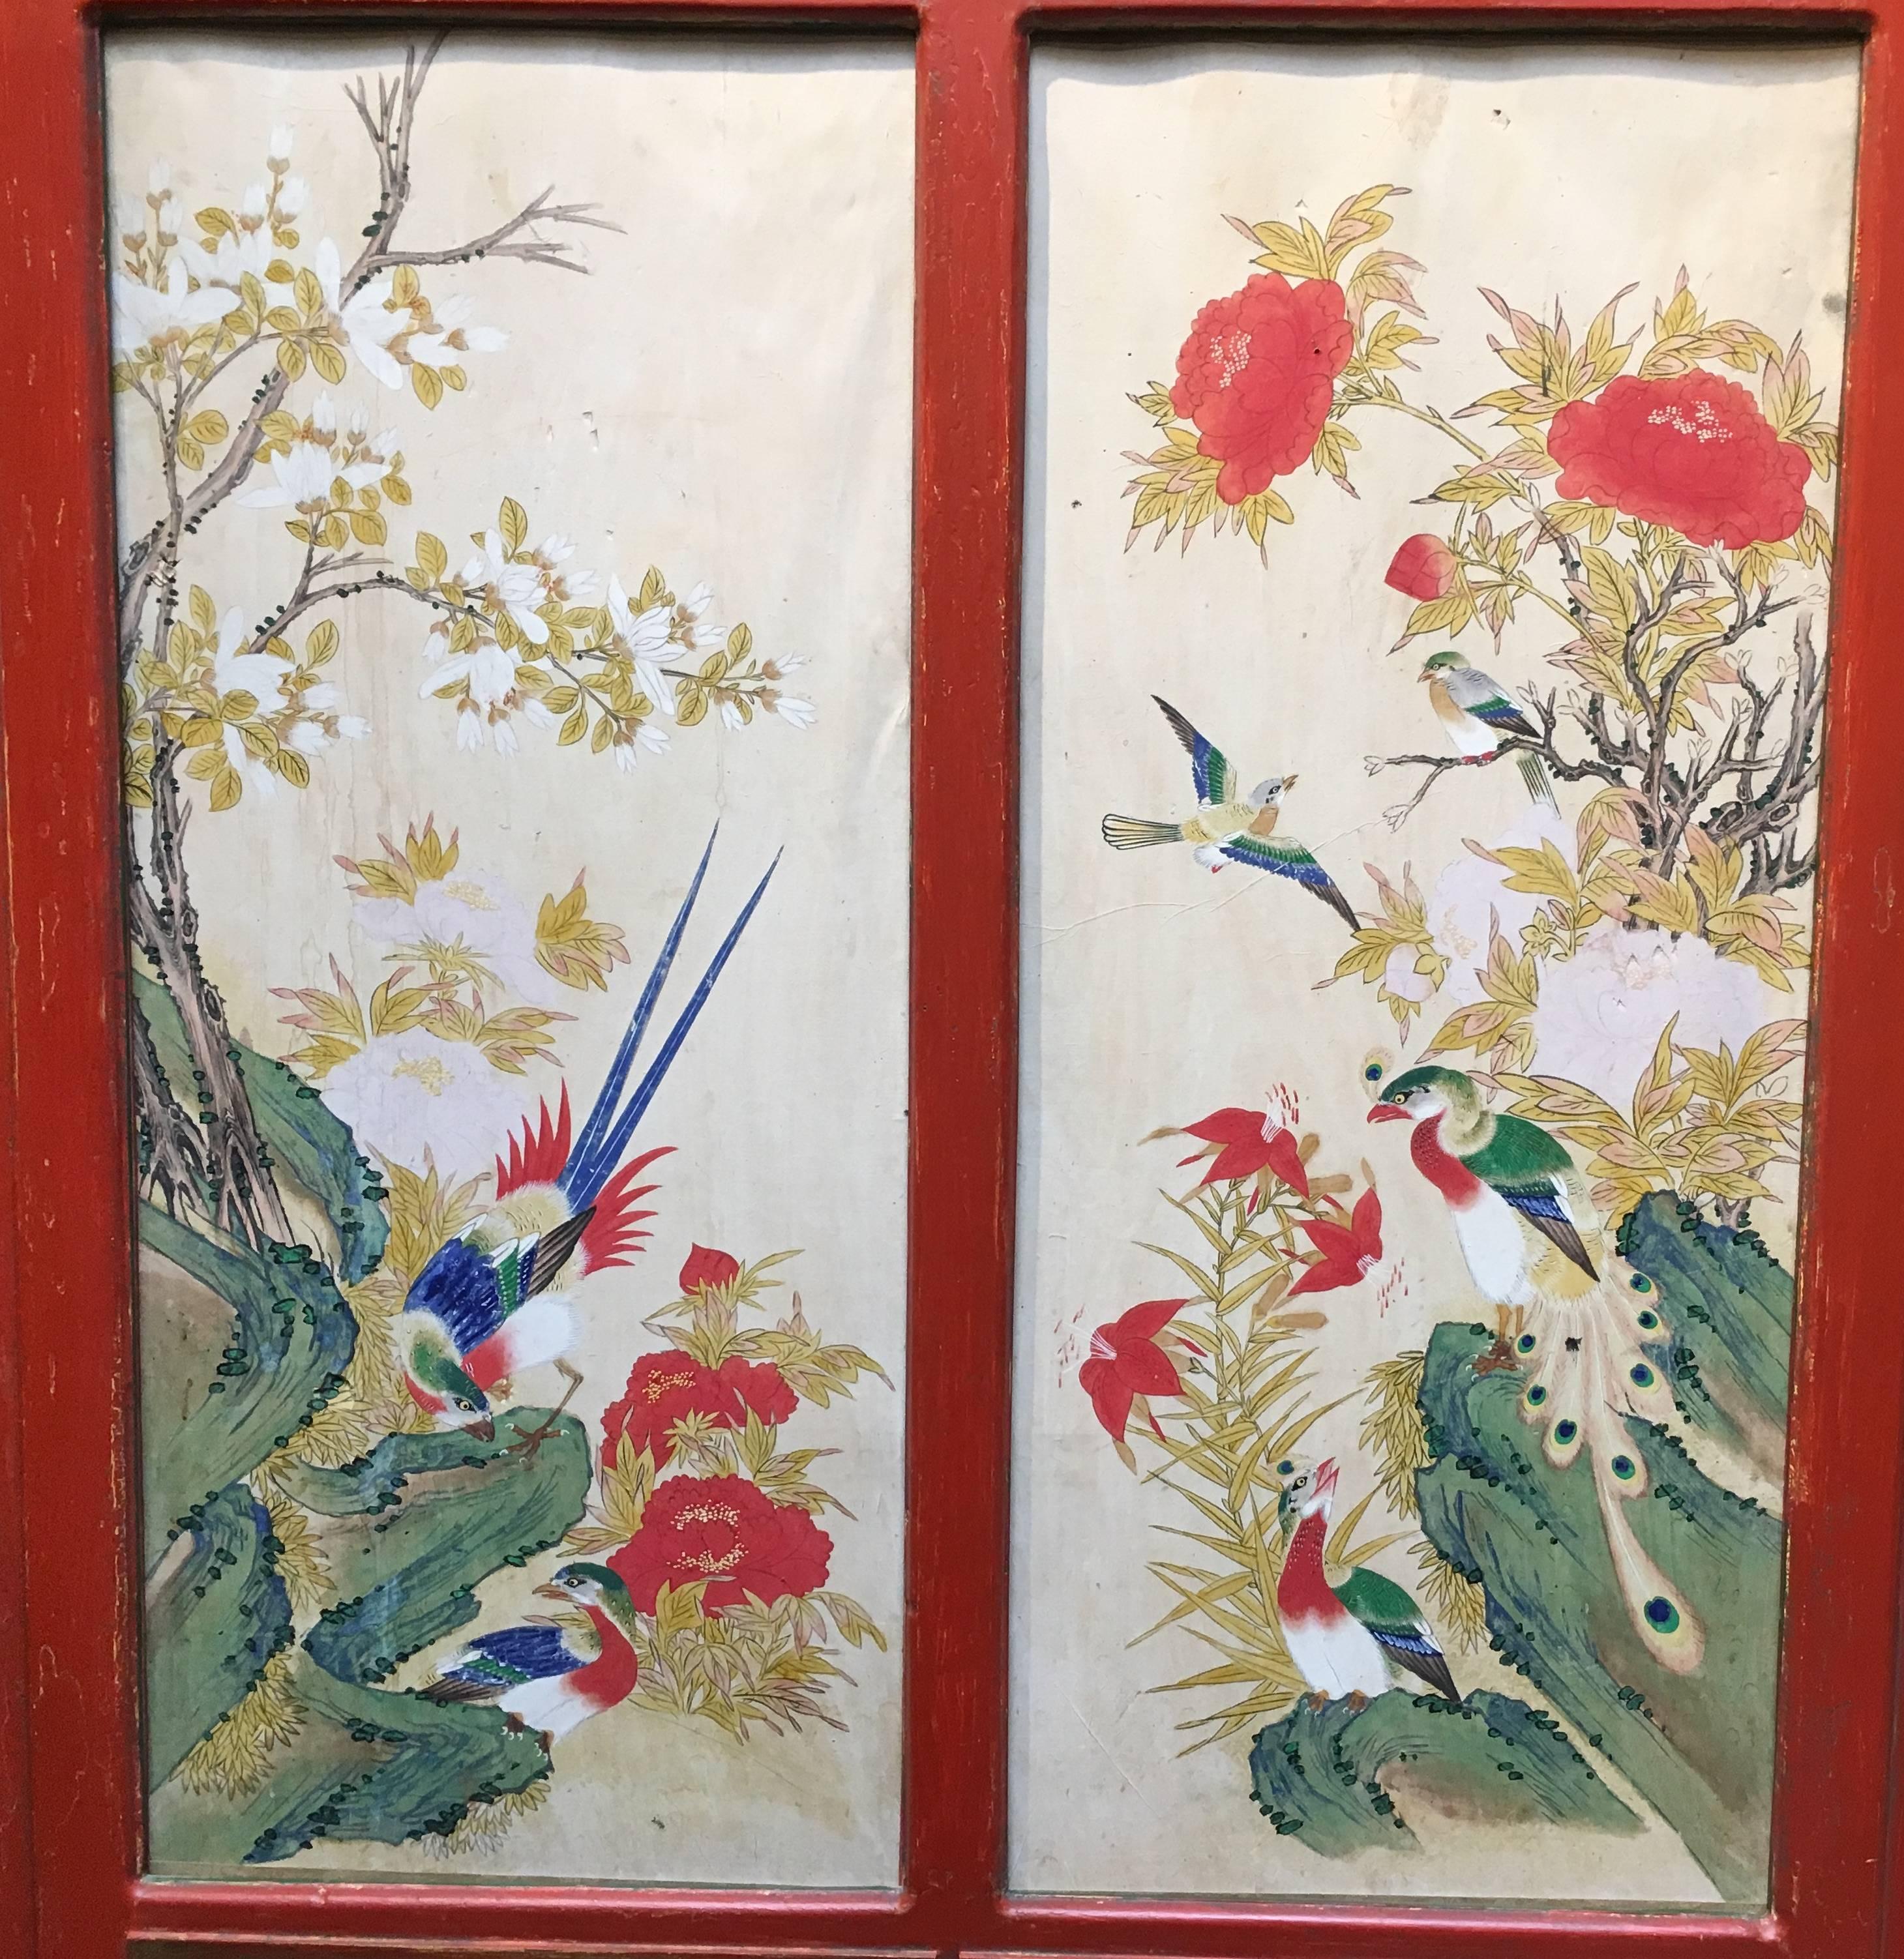 A vibrant early 20th century Korean Joseon Dynasty minhwa (folk art) painting framed in a 1950s Hollywood Regency orange-red chinoiserie frame. 

This stunning wall hanging features a pair of panels originally from a Korean minhwa screen. The screen